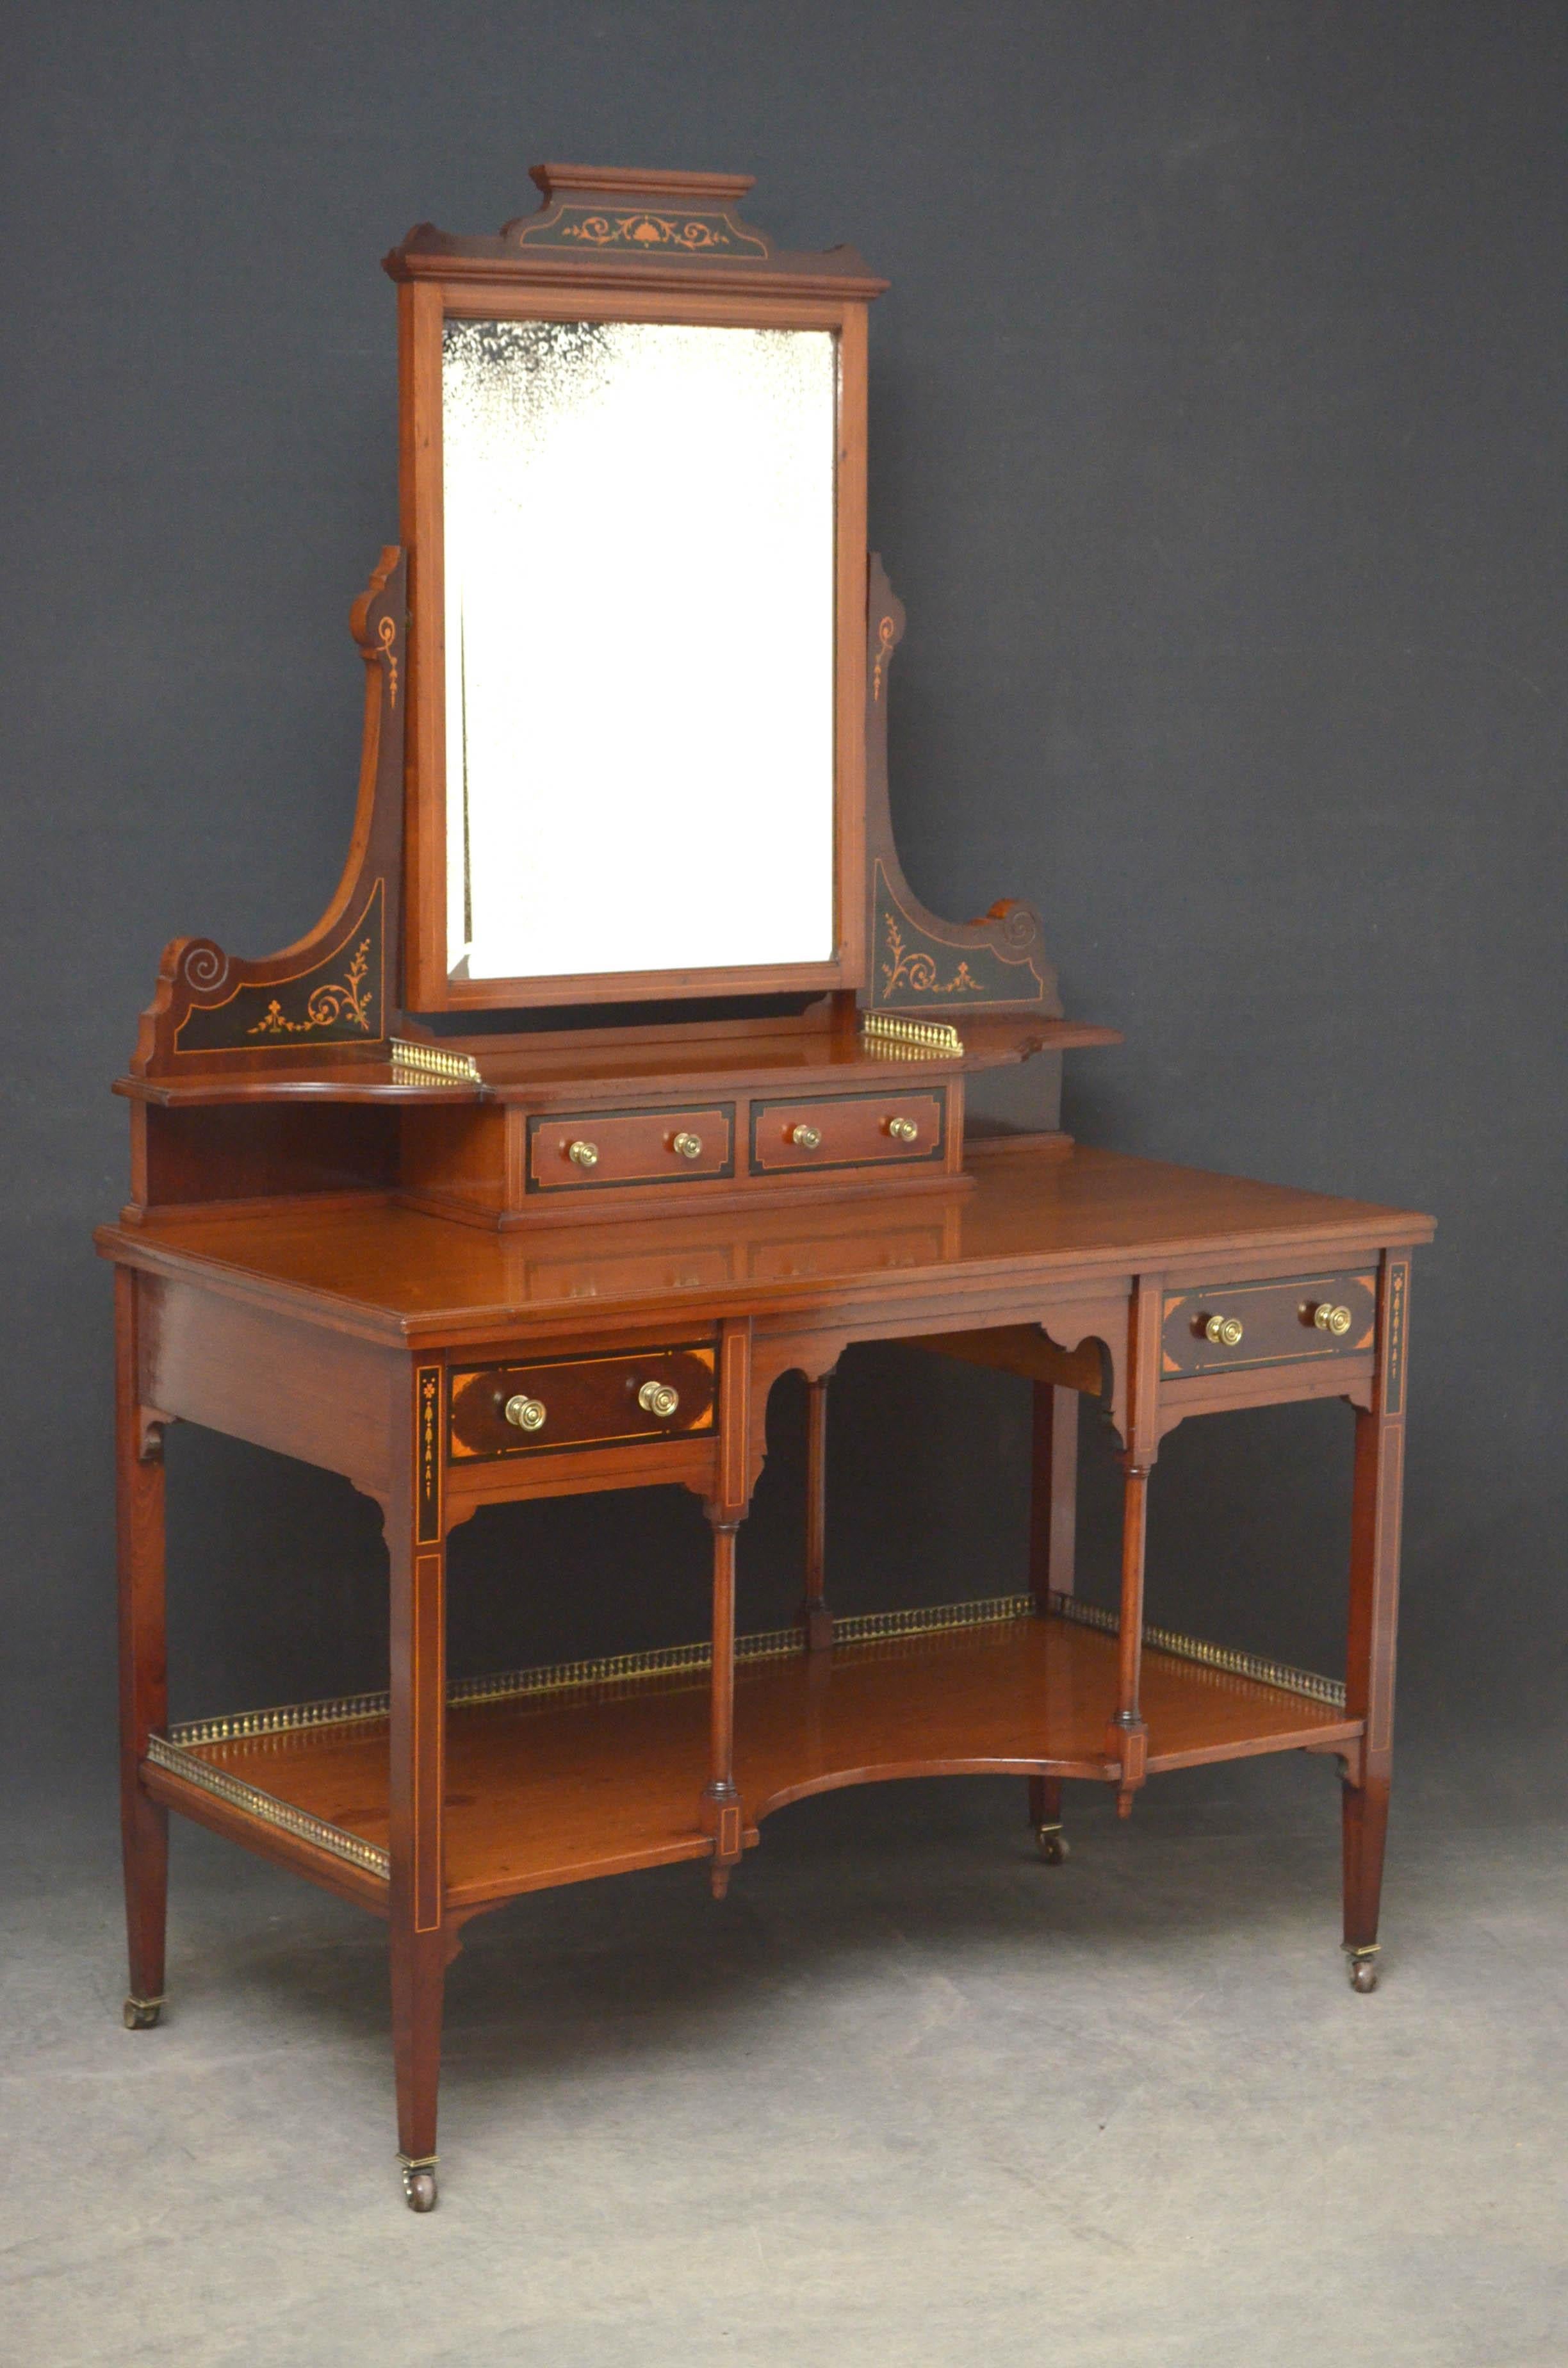 R00 stylish Edwardian dressing table in mahogany, having original bevelled edge mirror with some foxing (can be replaced on request) on carved and inlaid uprights terminating in shaped tier with brass gallery and inlaid jewelry drawers all above